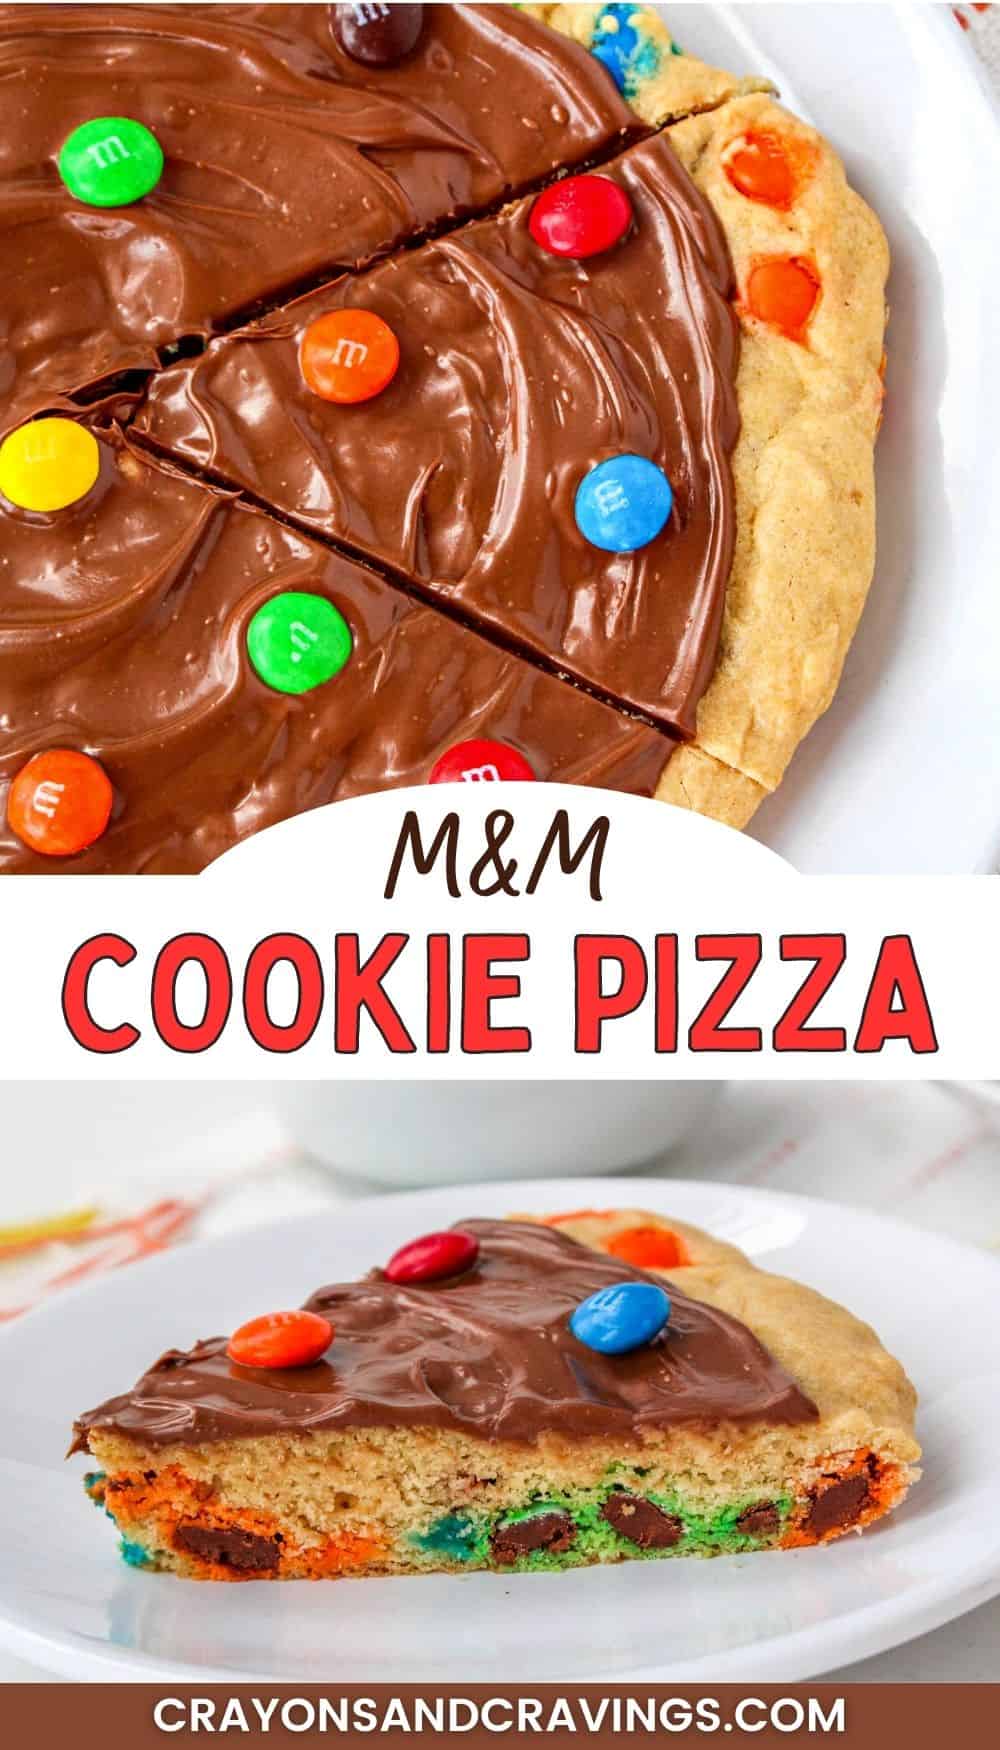 M&M cookie pizza pin image.